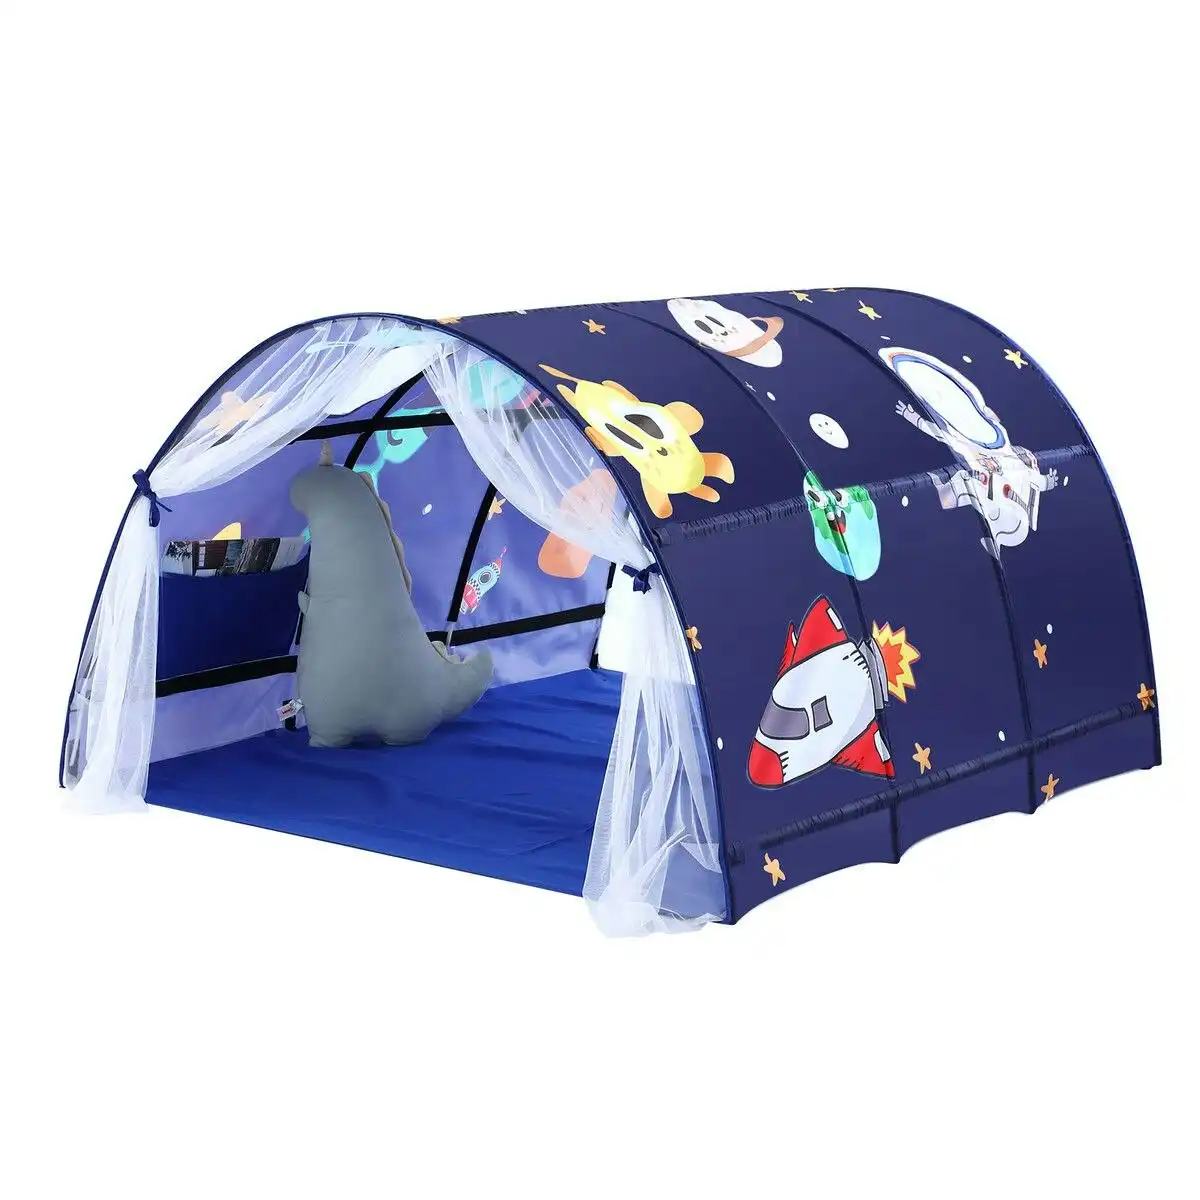 Ausway Playhouse Tent Portable Stars Bed Kids Play Game House Cottage DIY Sleeping Canopy Indoor Outdoor Blue